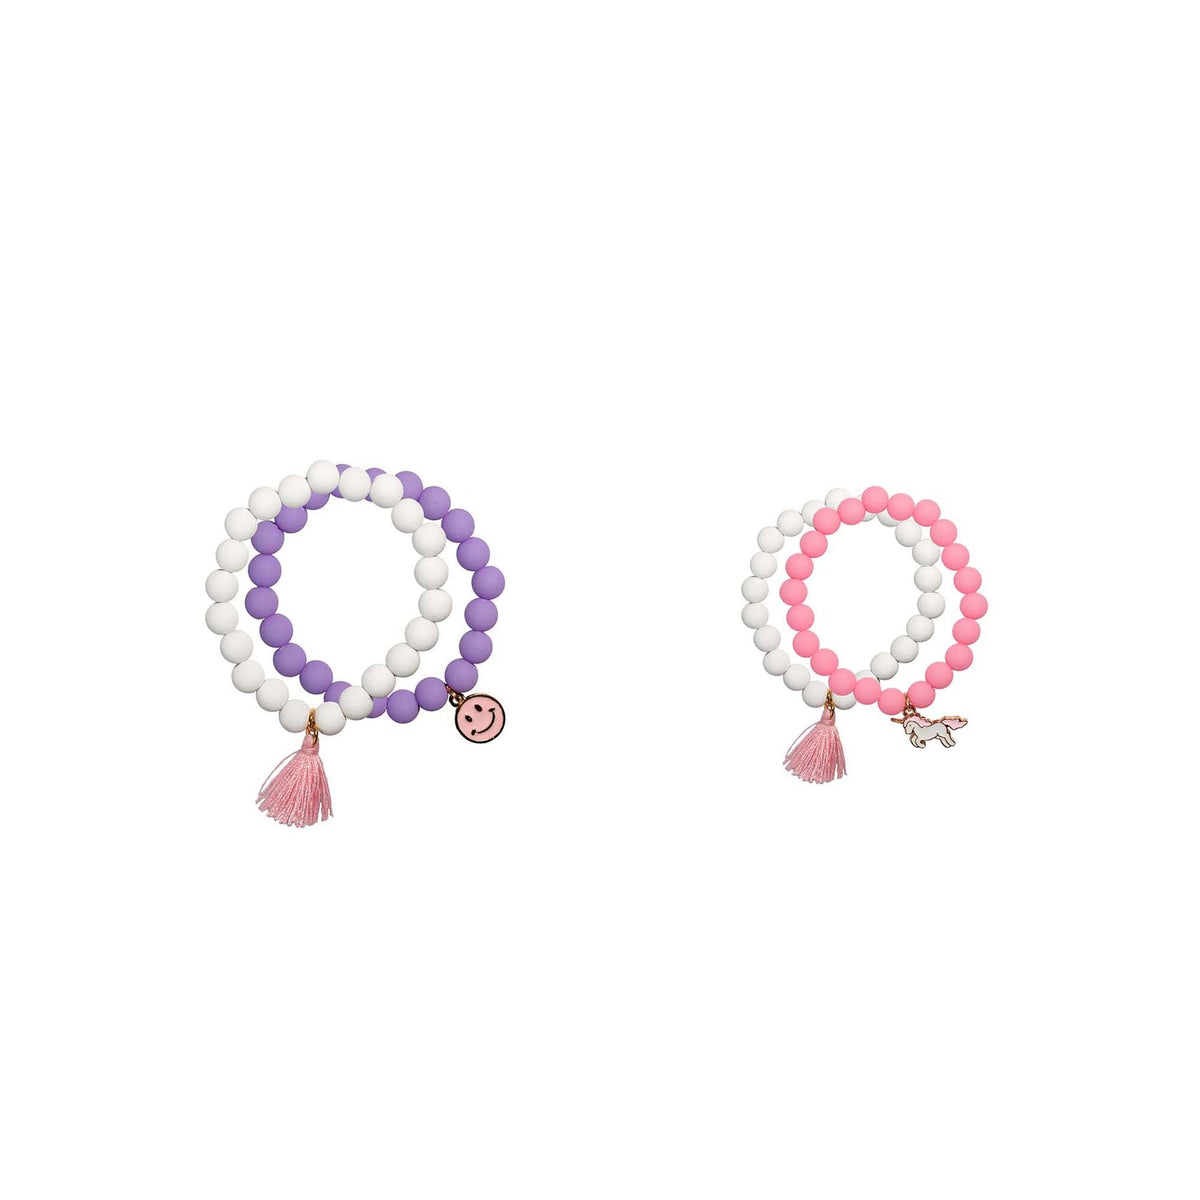 Great Pretenders Impulse Buying Pretty Pastel Soft Touch Bracelets for Kids, Assortment, 2 Count